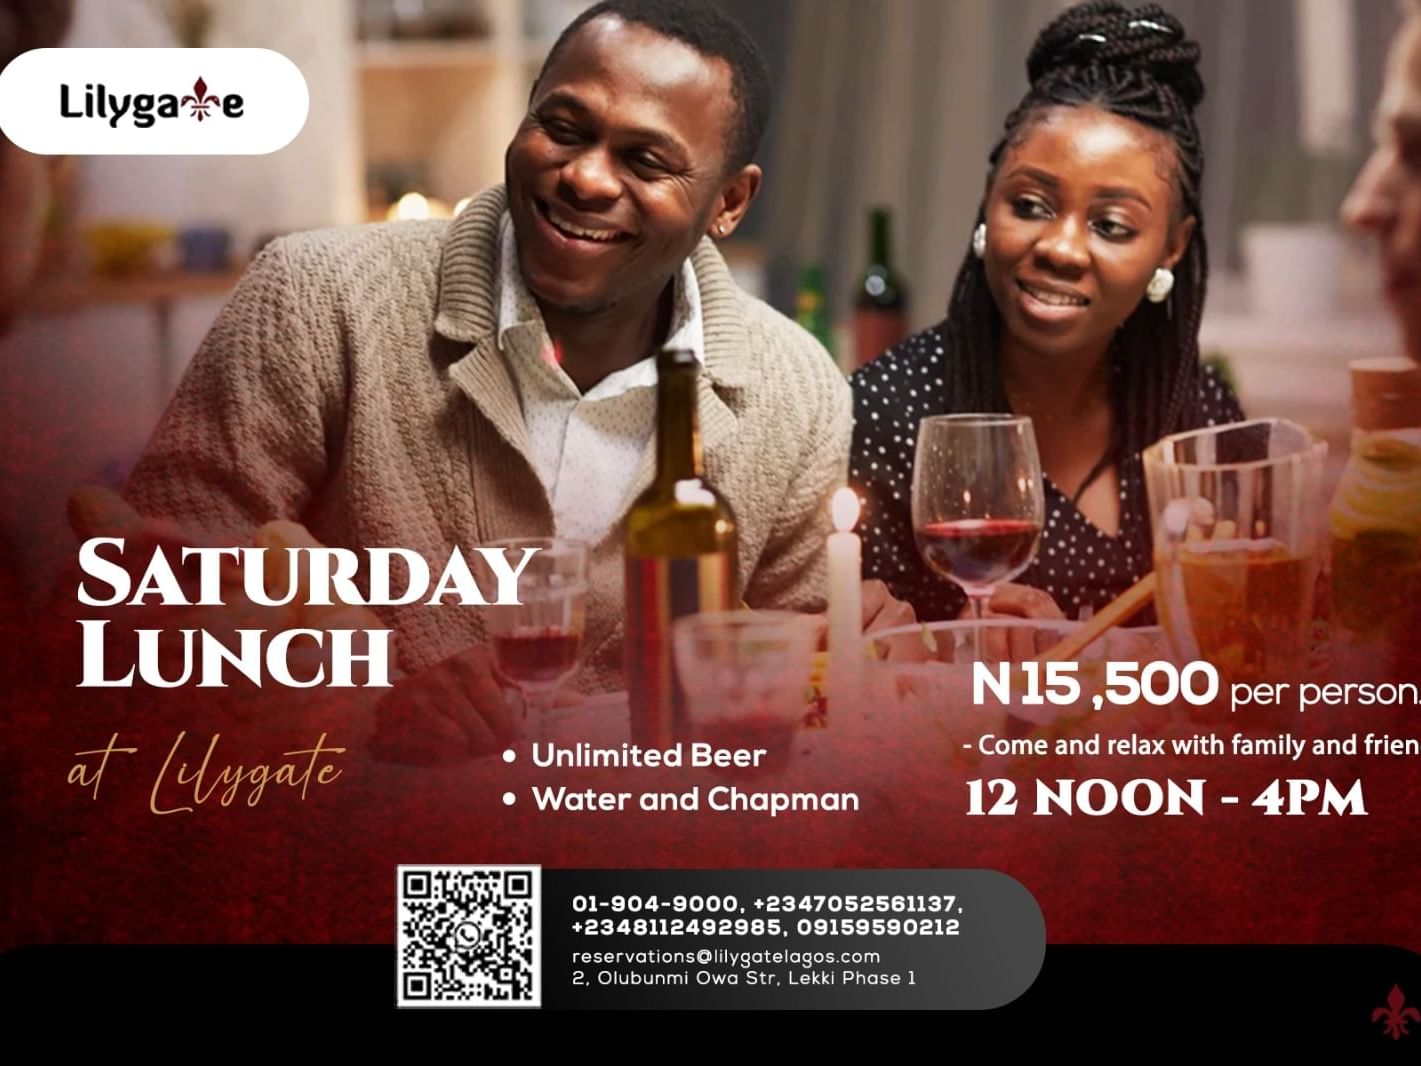 Saturday Lunch with Unlimited buffet, beer, water and Chapman, at 15,500 per person 12noon - 4pm